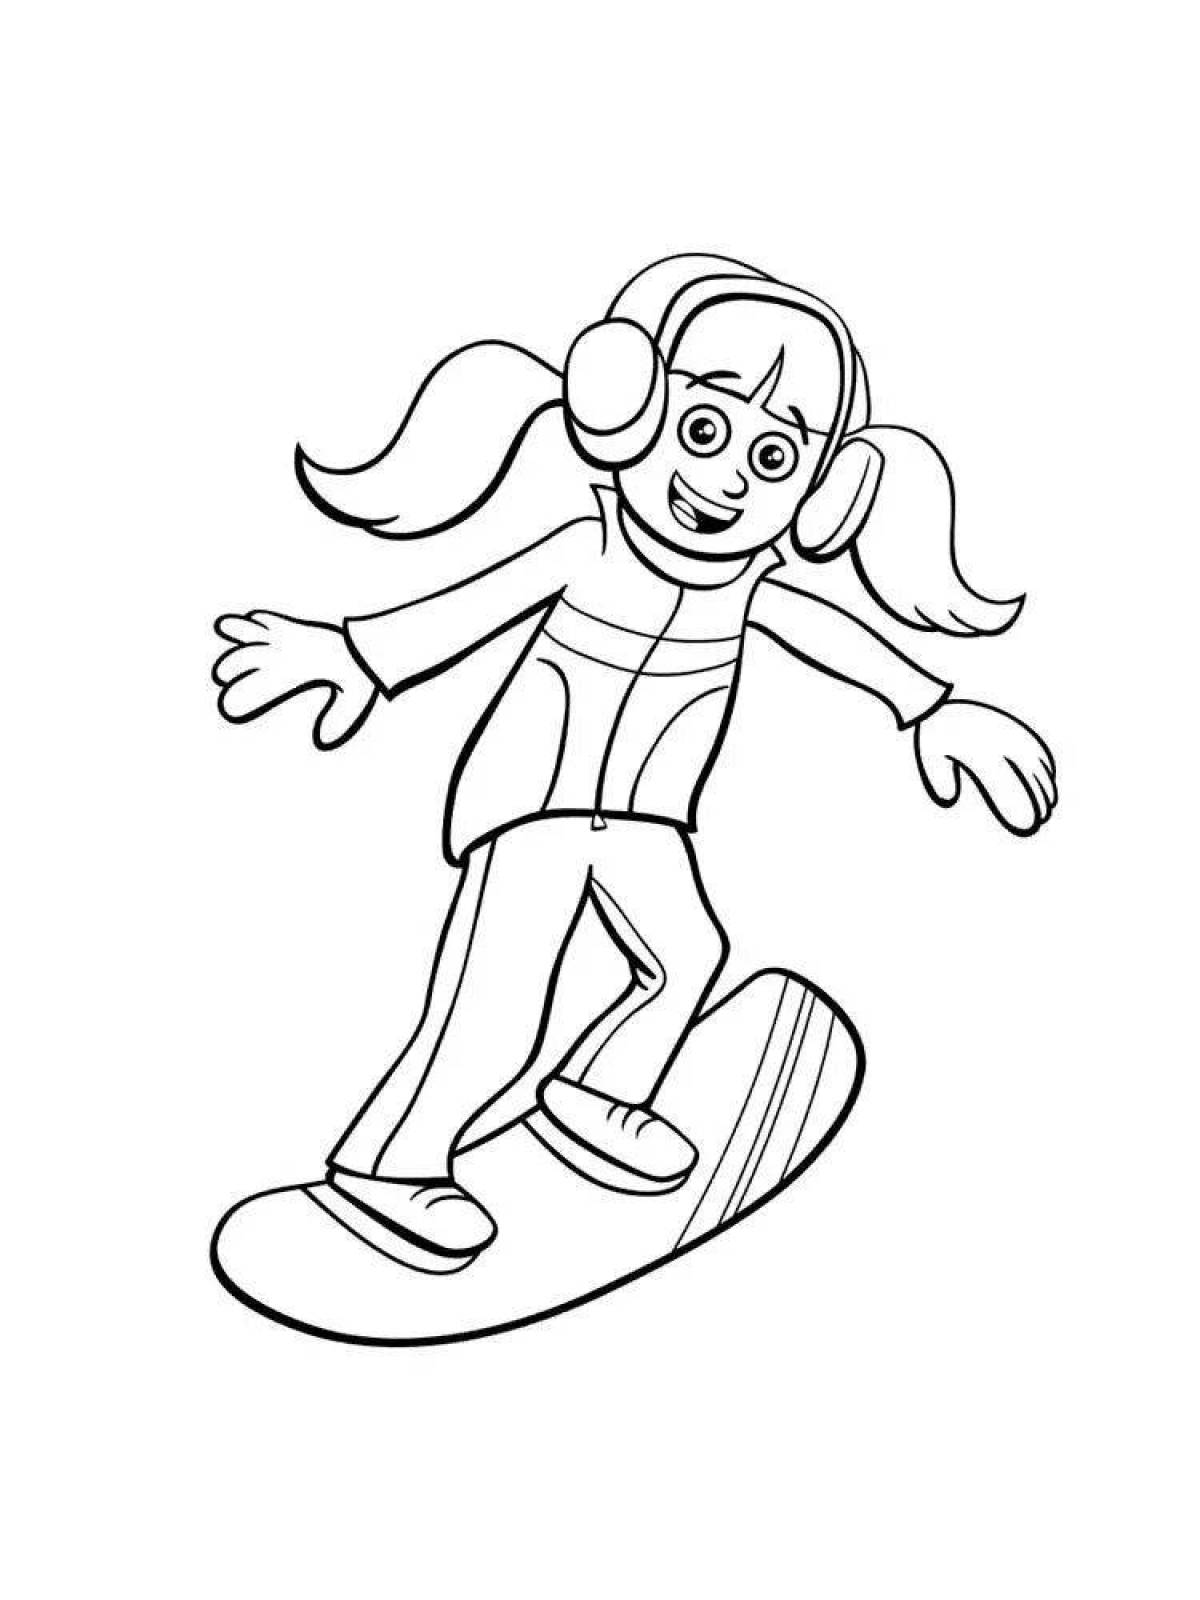 Adventurous snowboarder coloring page